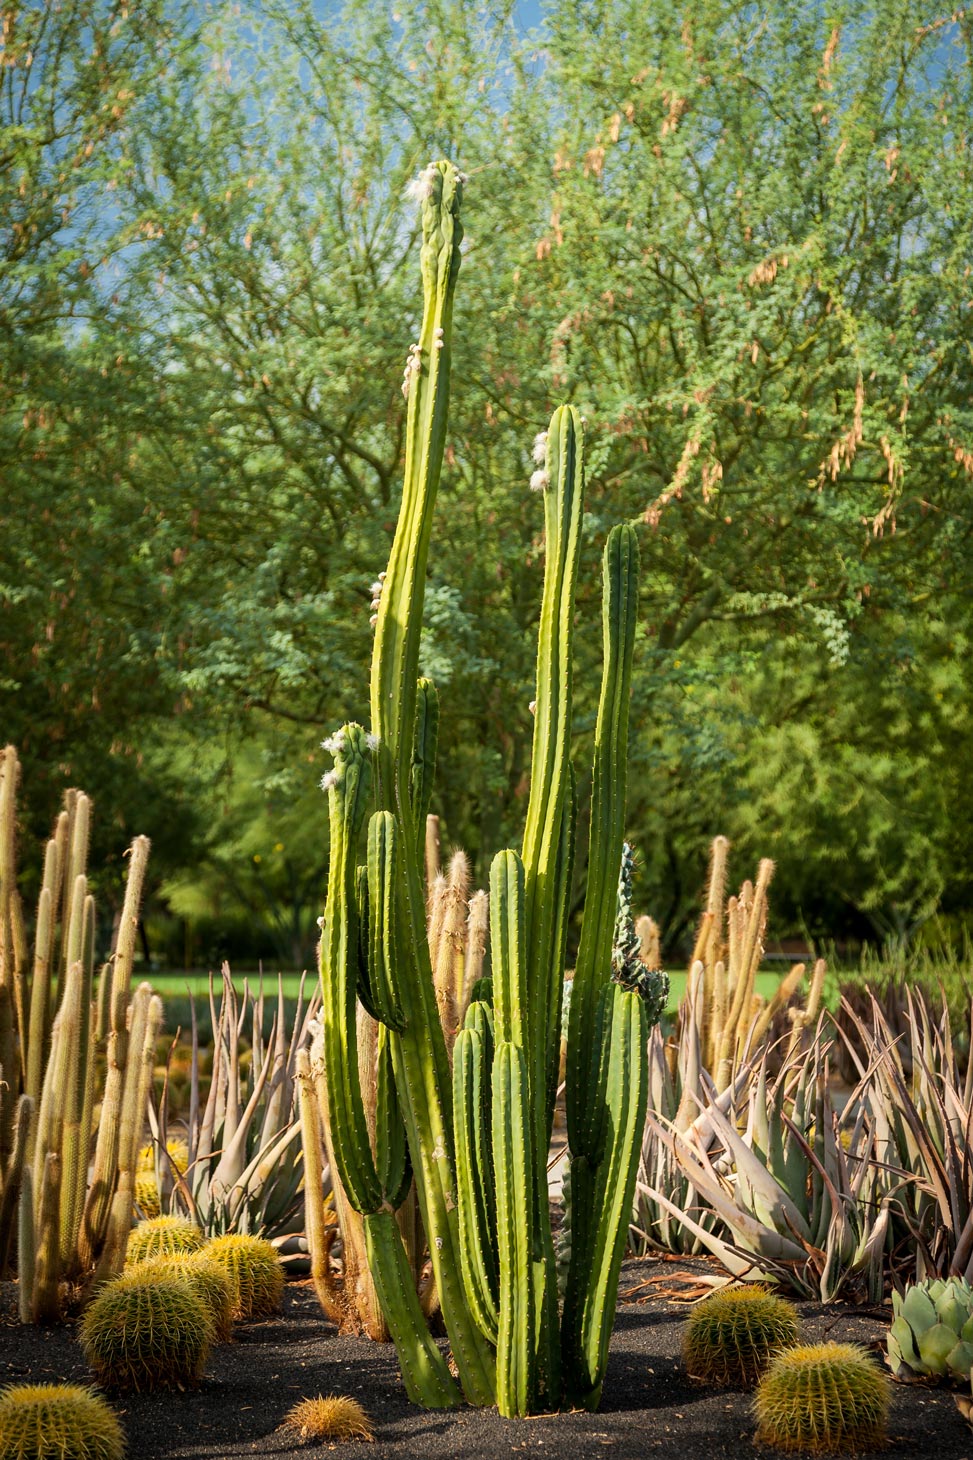 A tall, thin, bright green San Pedro cactus among other varying specimens in the specimen bed at Sunnylands Center & Gardens.